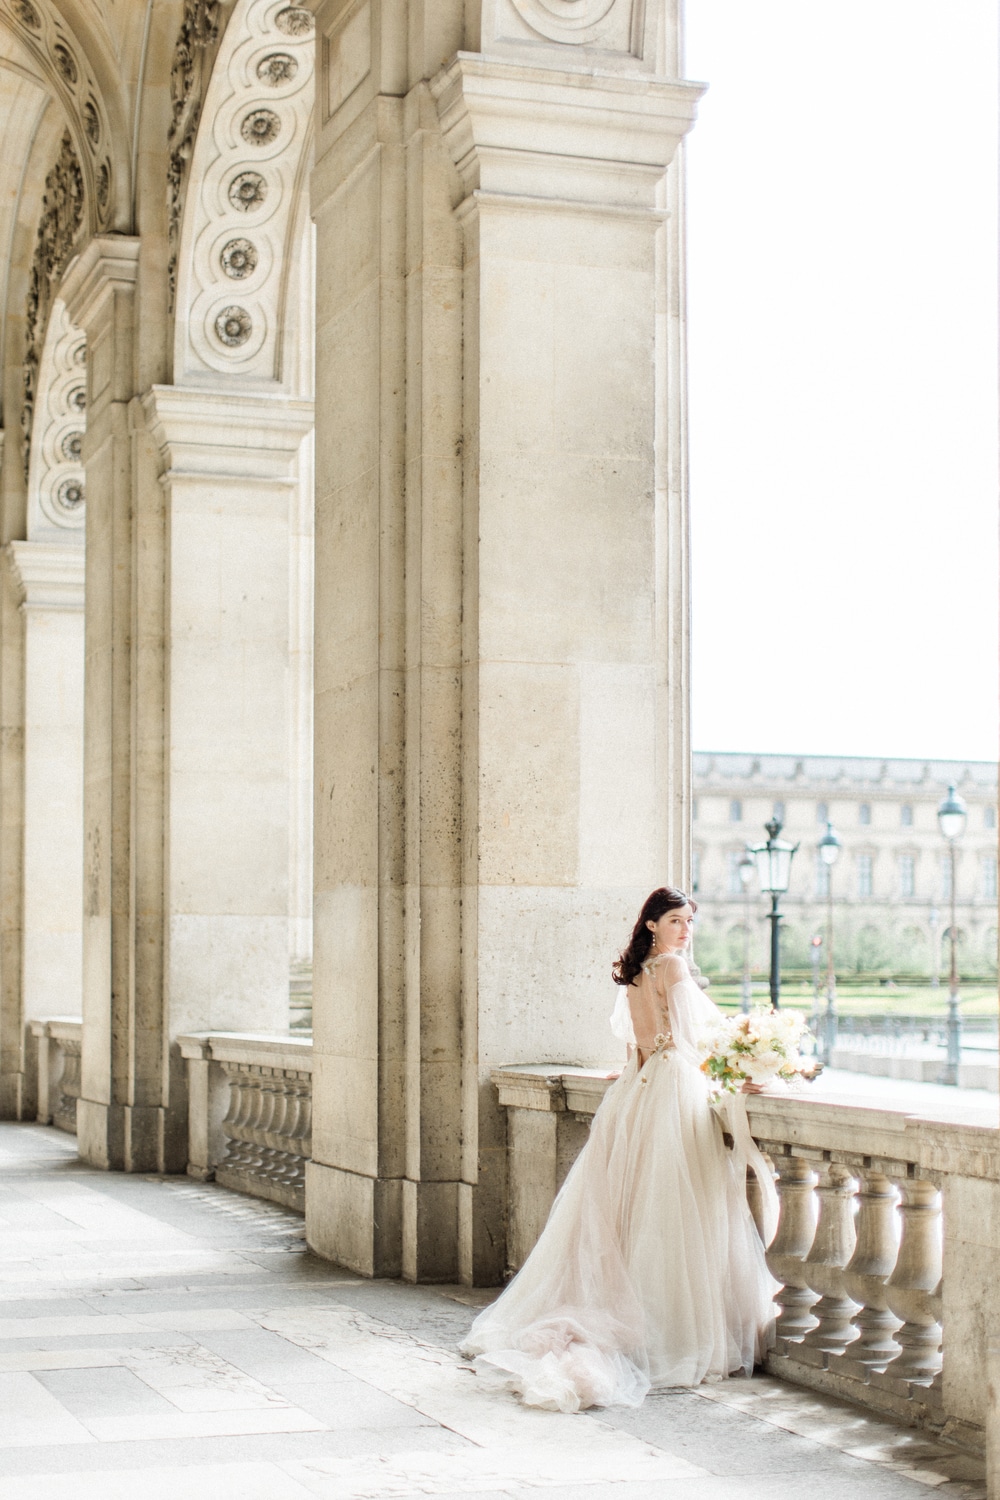 French bride in Paris with the magnificent architecture and a gorgeous antic gown